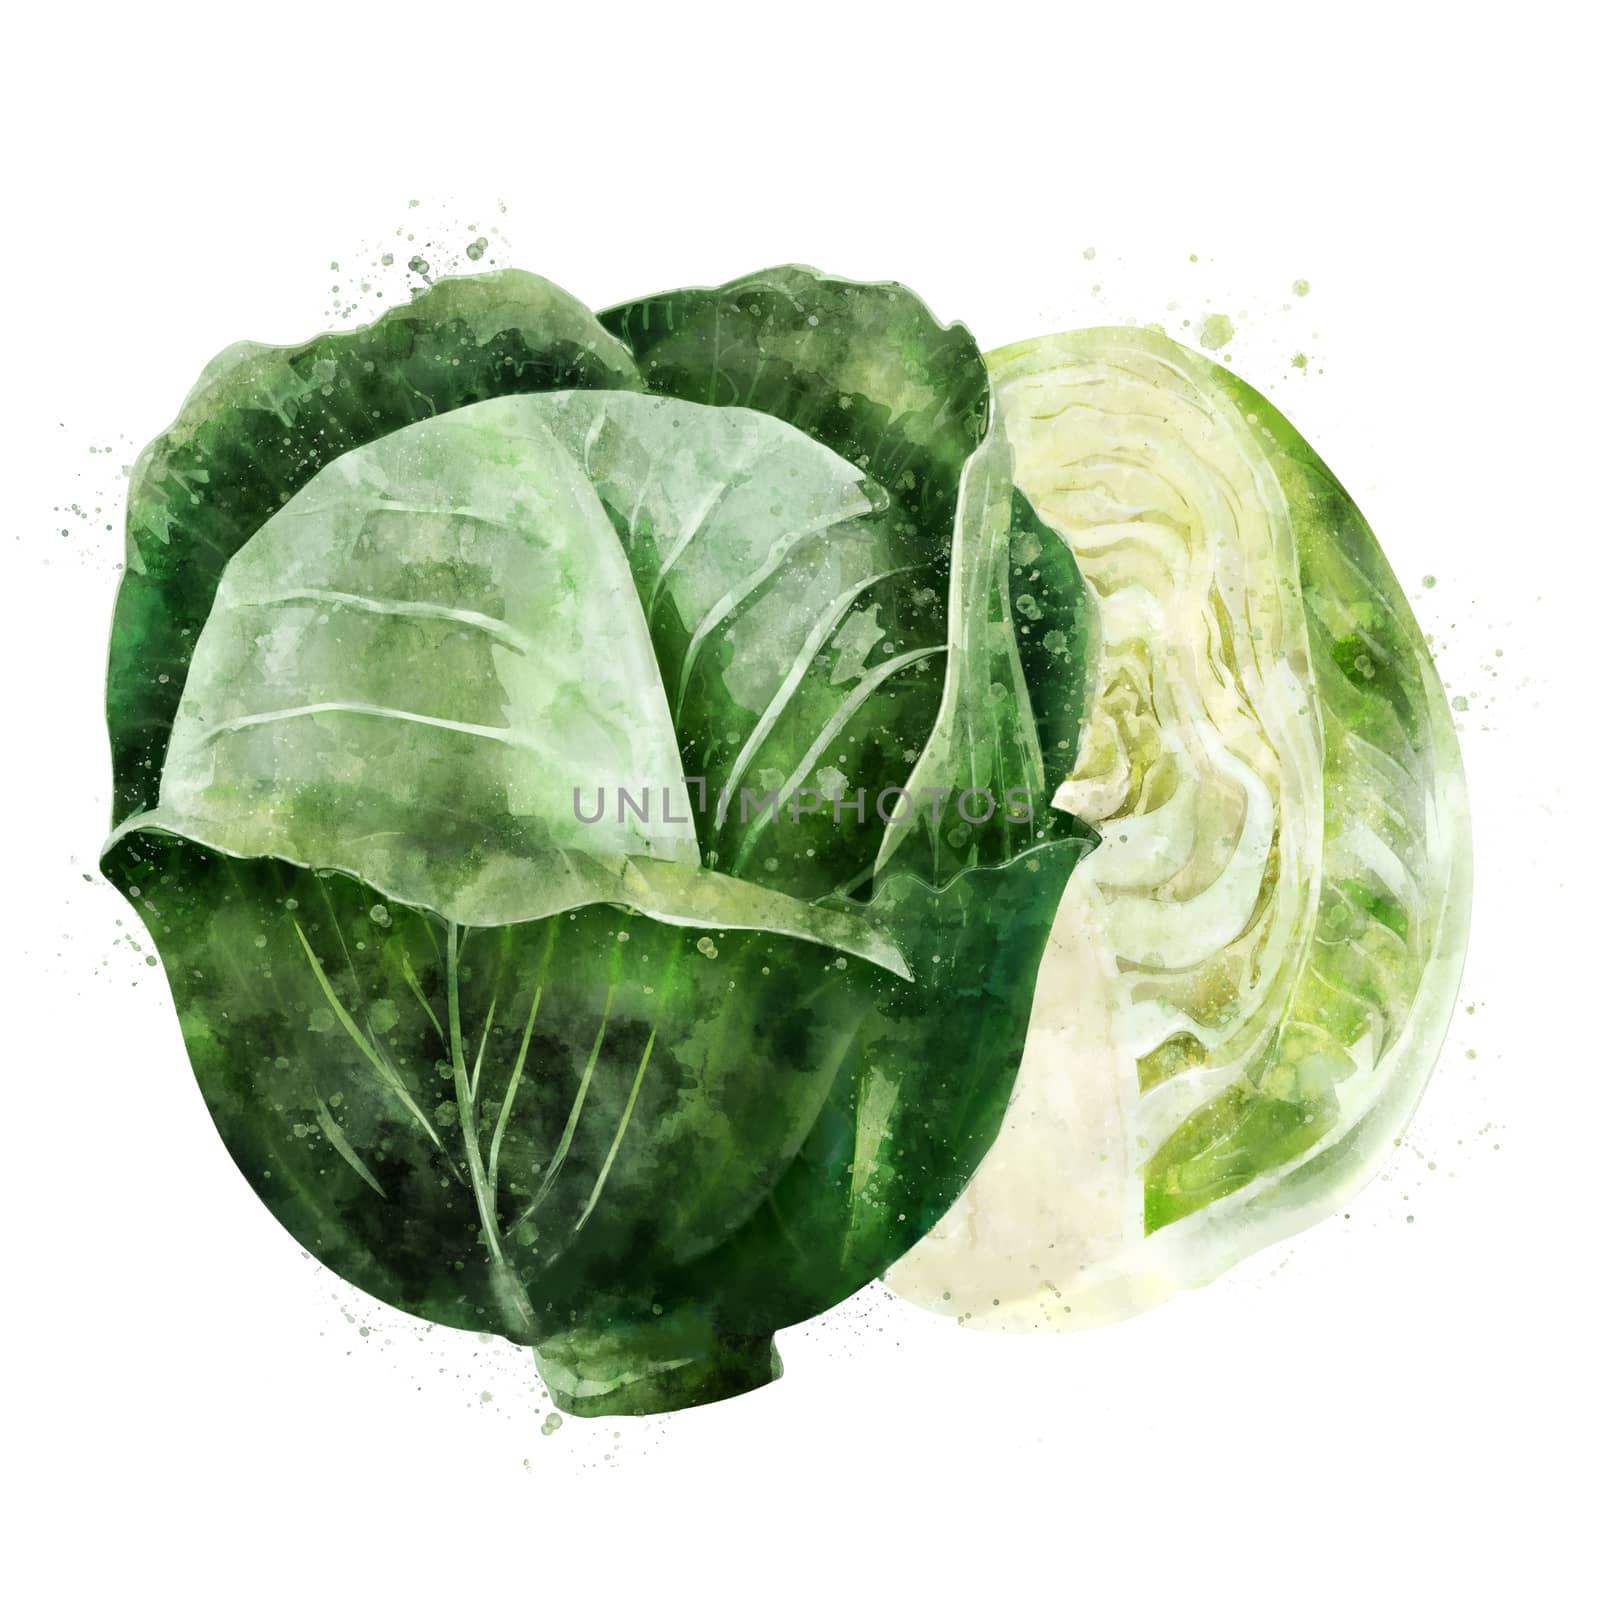 Cabbage on white background. Watercolor illustration by ConceptCafe